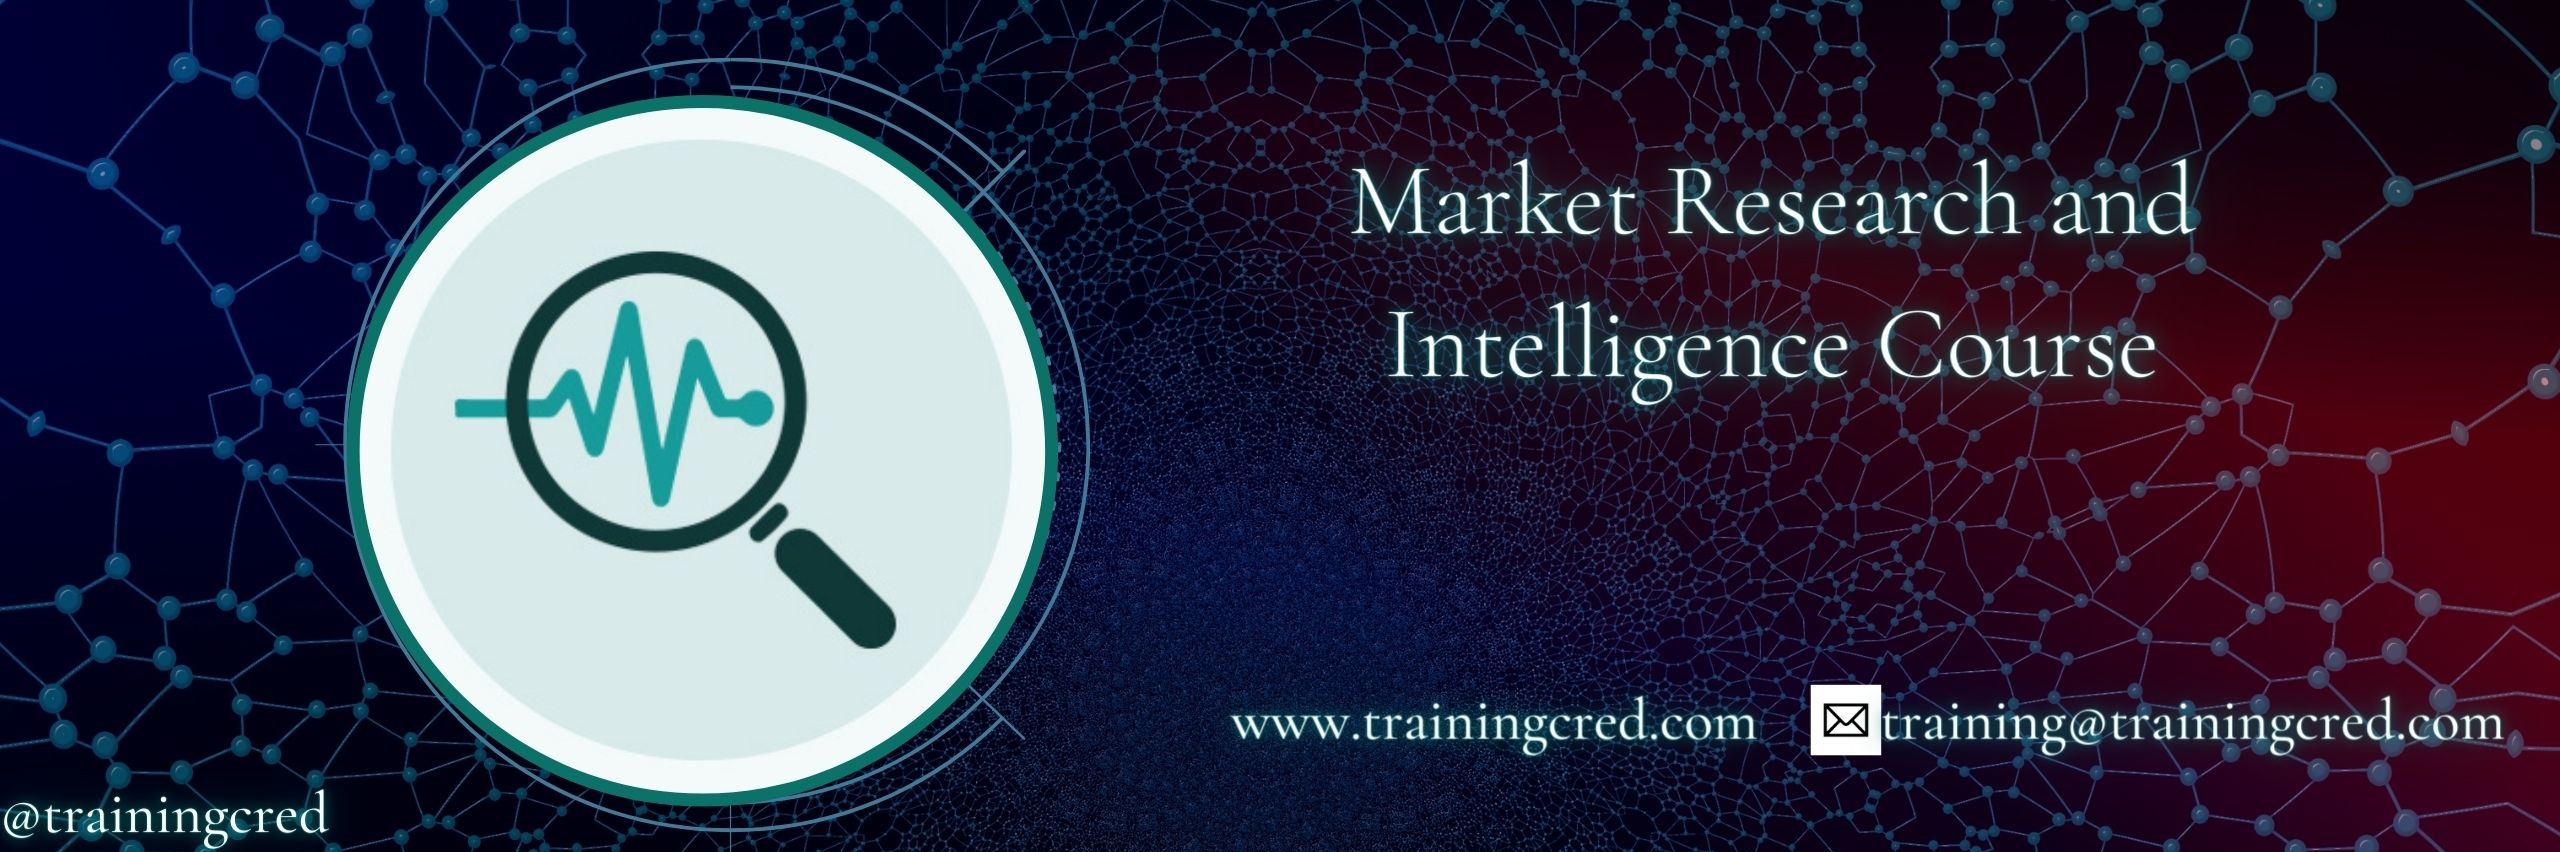 Market Research and Intelligence Training